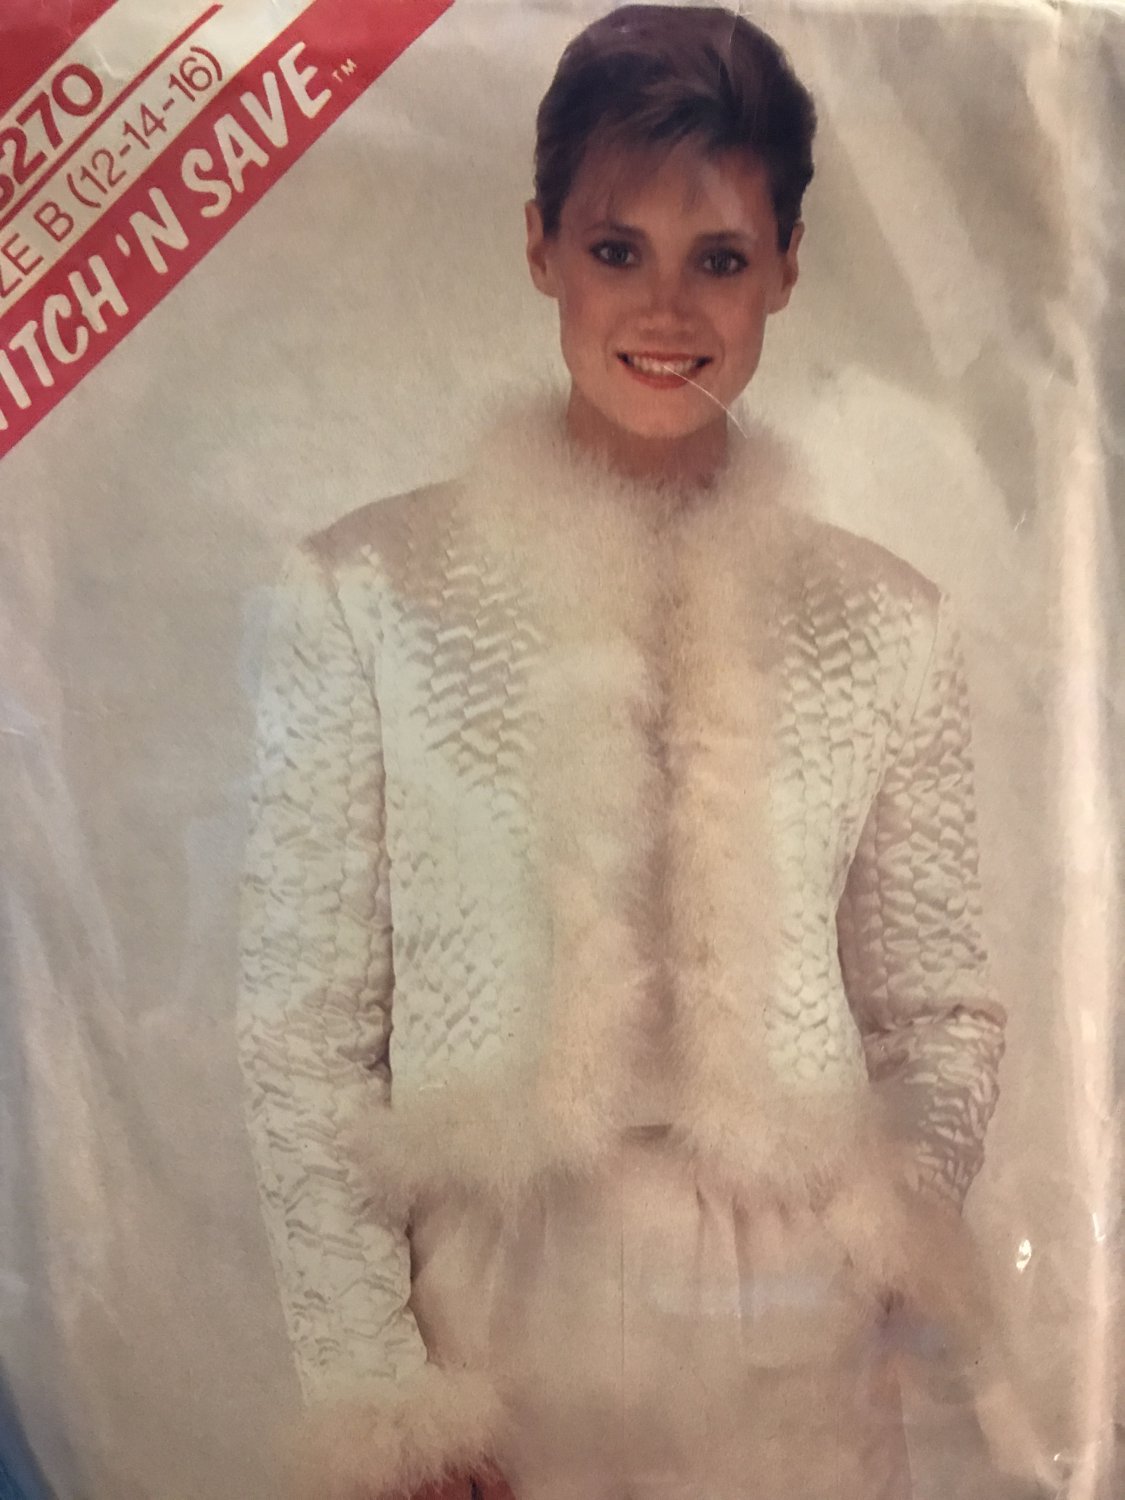 McCall's 8270 Misses' Jacket Sewing Pattern size 12-14-16